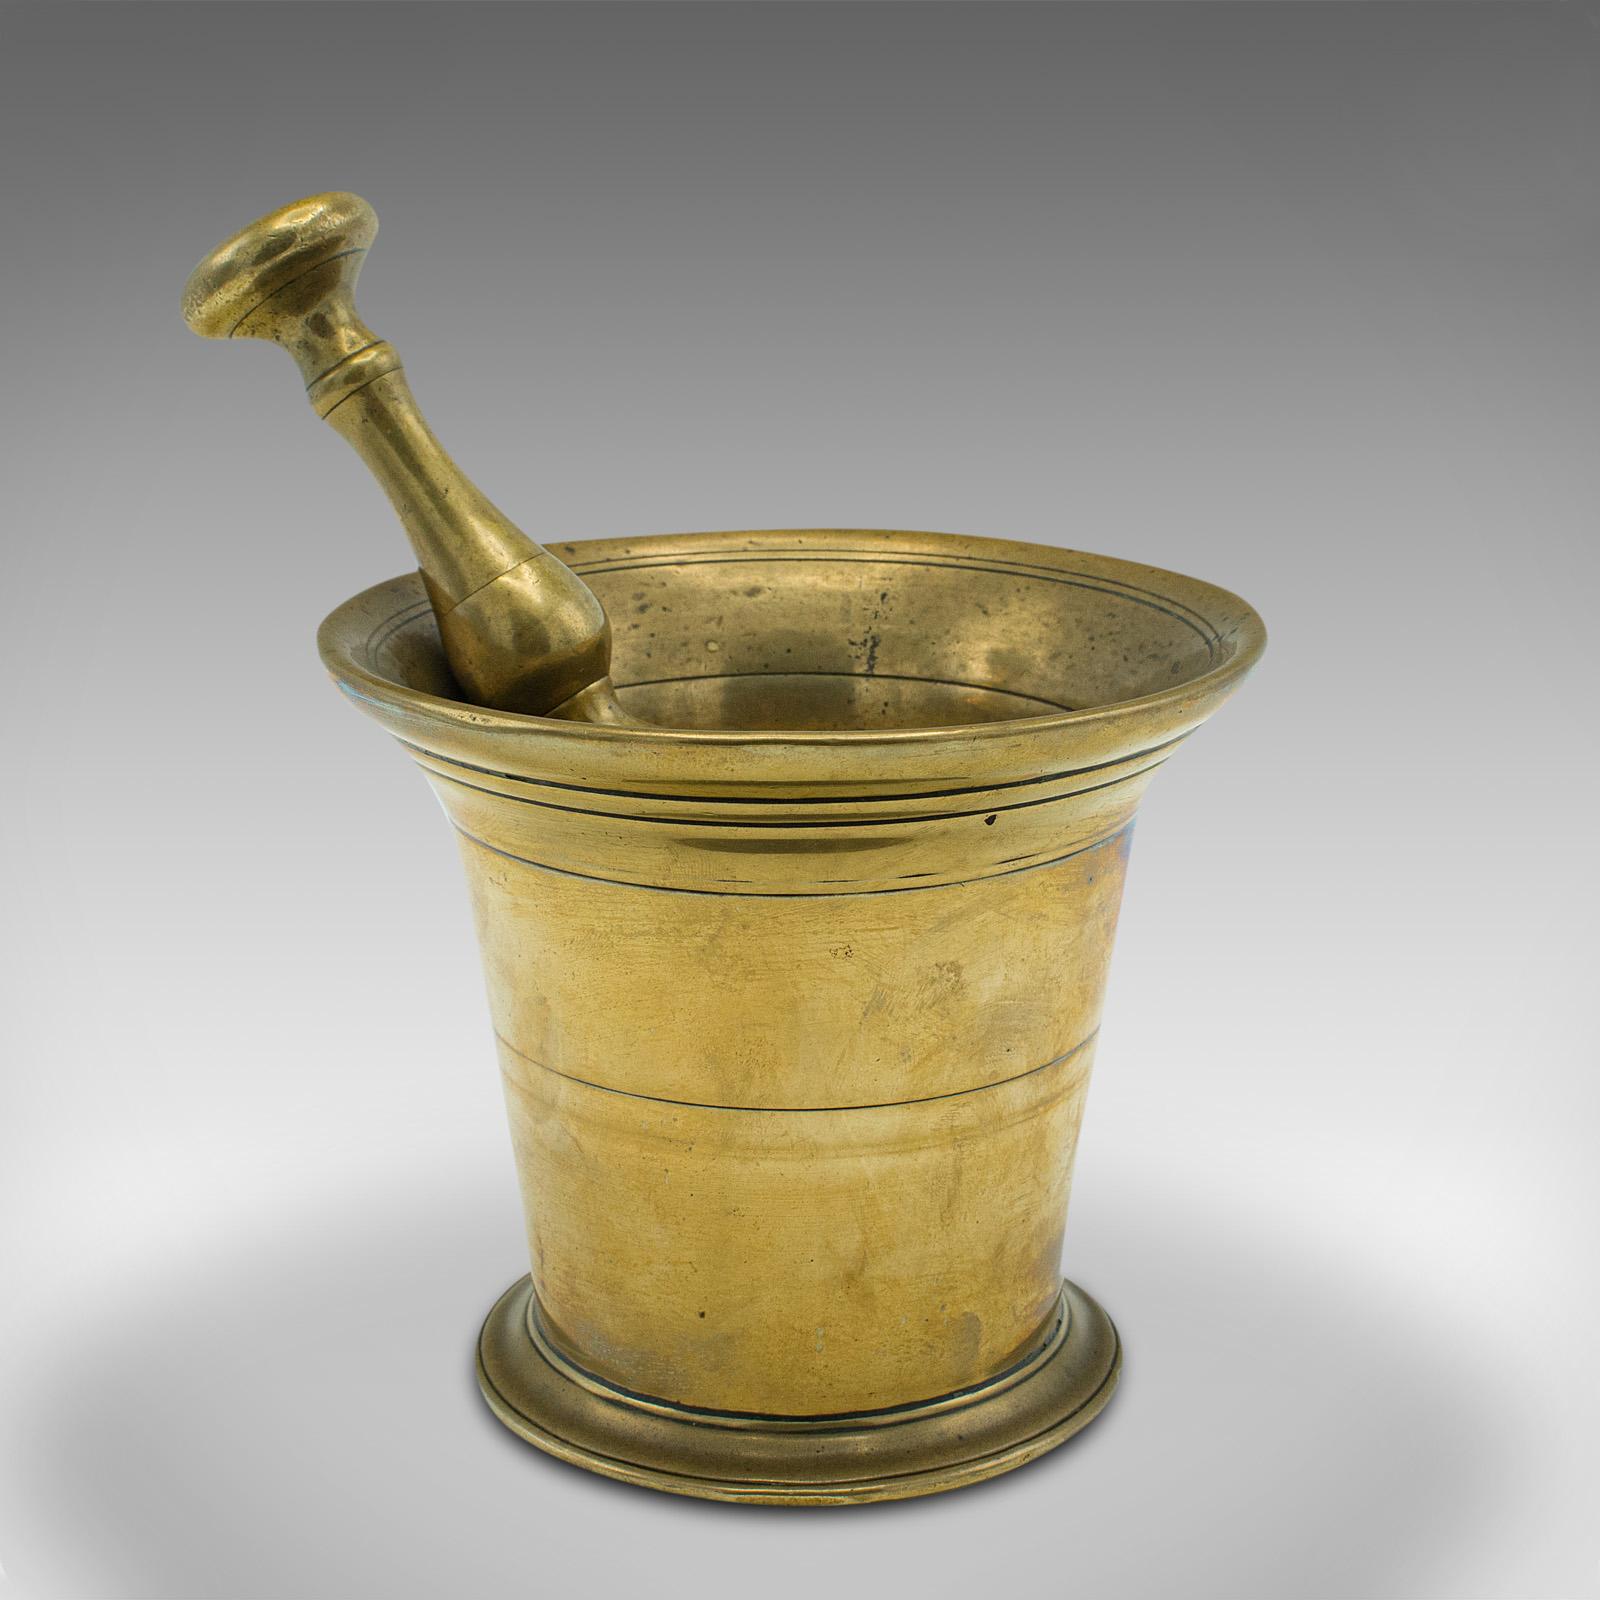 Early Victorian Antique Apothecary Mortar and Pestle, English, Brass, Chemist, Victorian, C.1850 For Sale